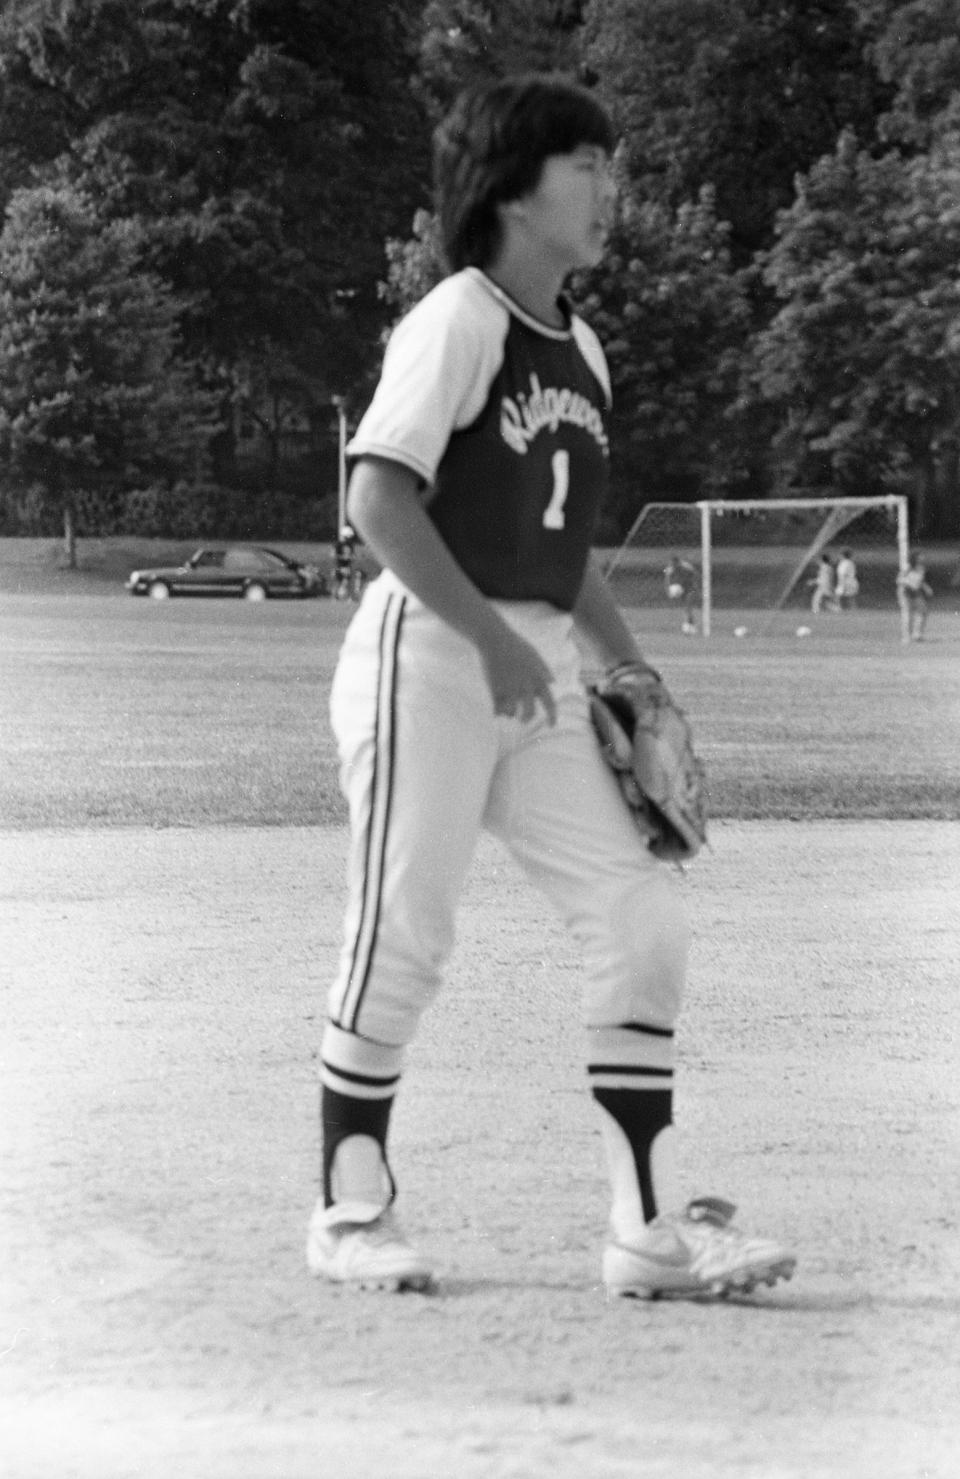 Ng playing softball at Ridgewood High School in 1986<span class="copyright">Mike Grattini—USA TODAY NETWORK/Reuters</span>